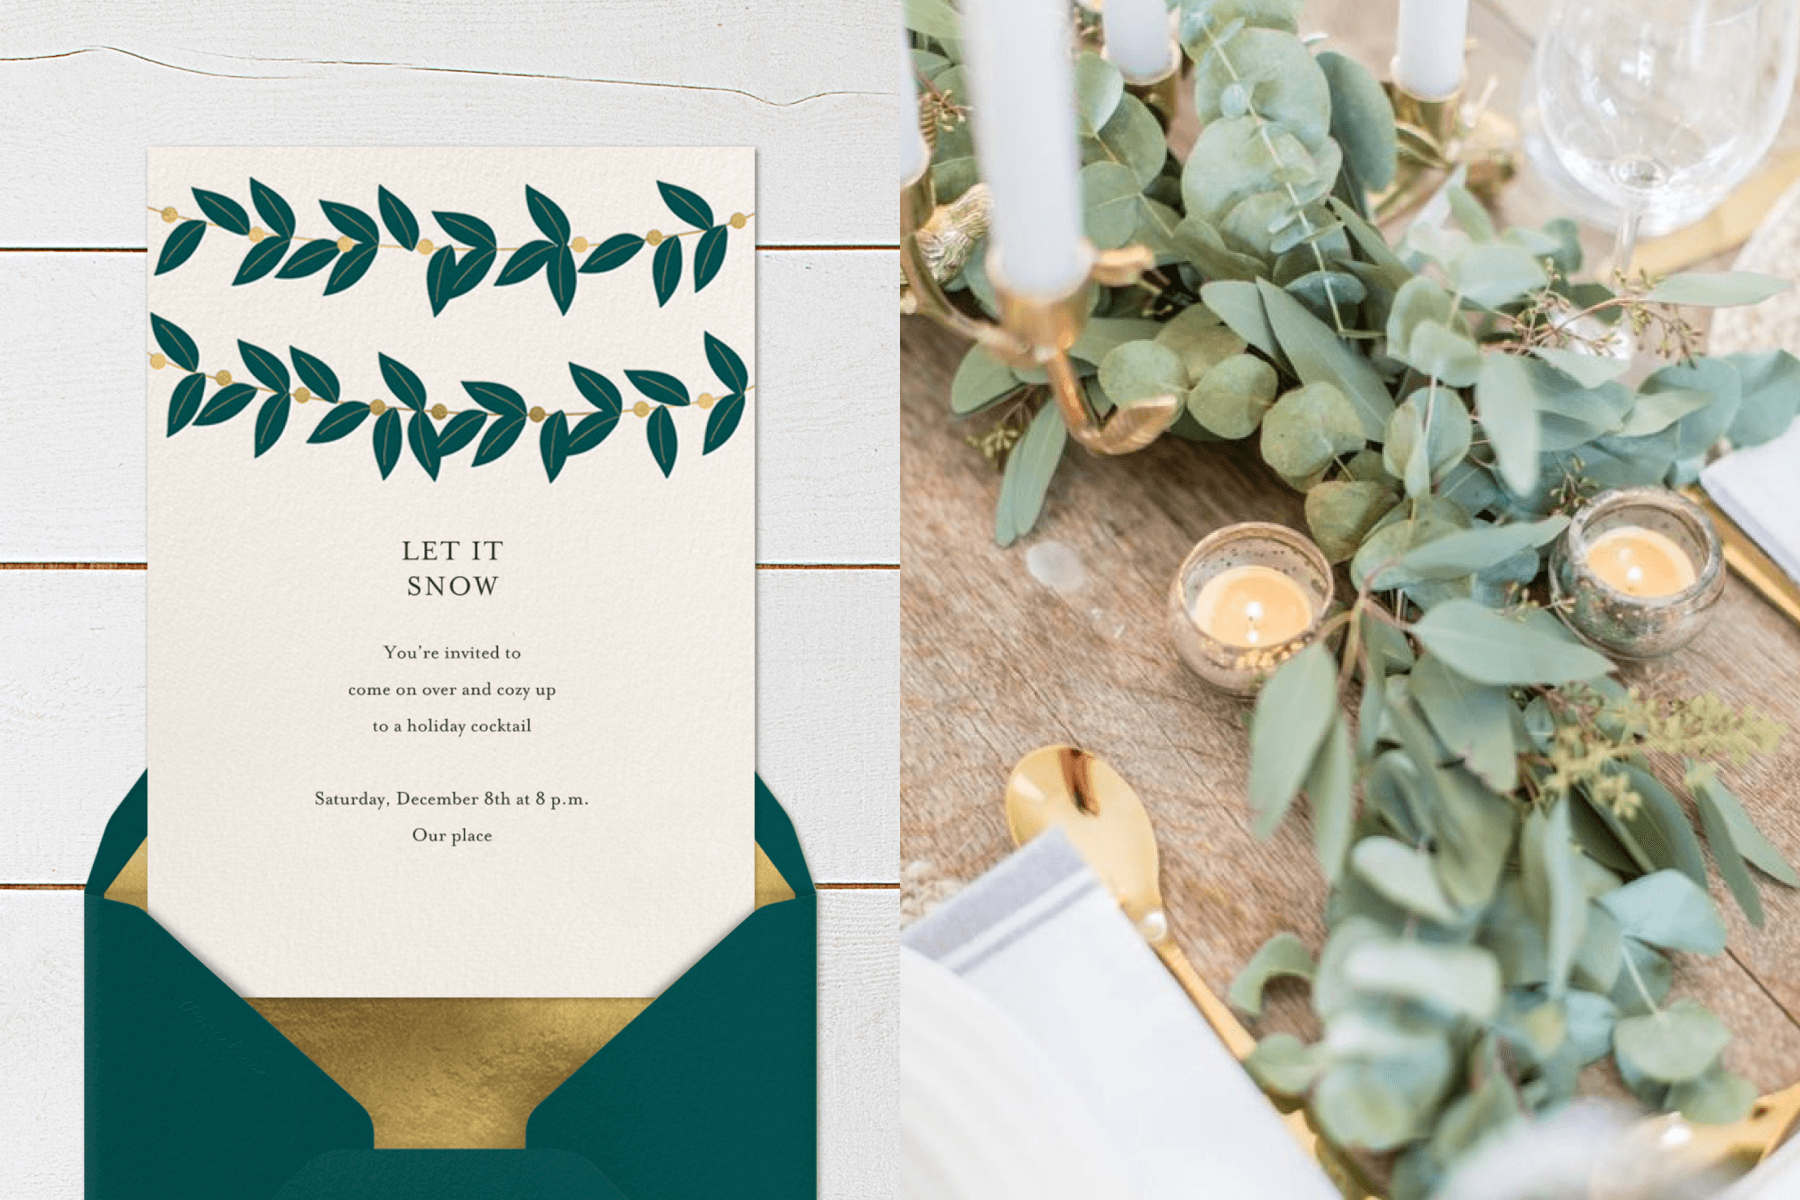 Left: A cream holiday party invitation with an illustration of a green garland; right: Close up photograph of a table setting with a eucalyptus garland.